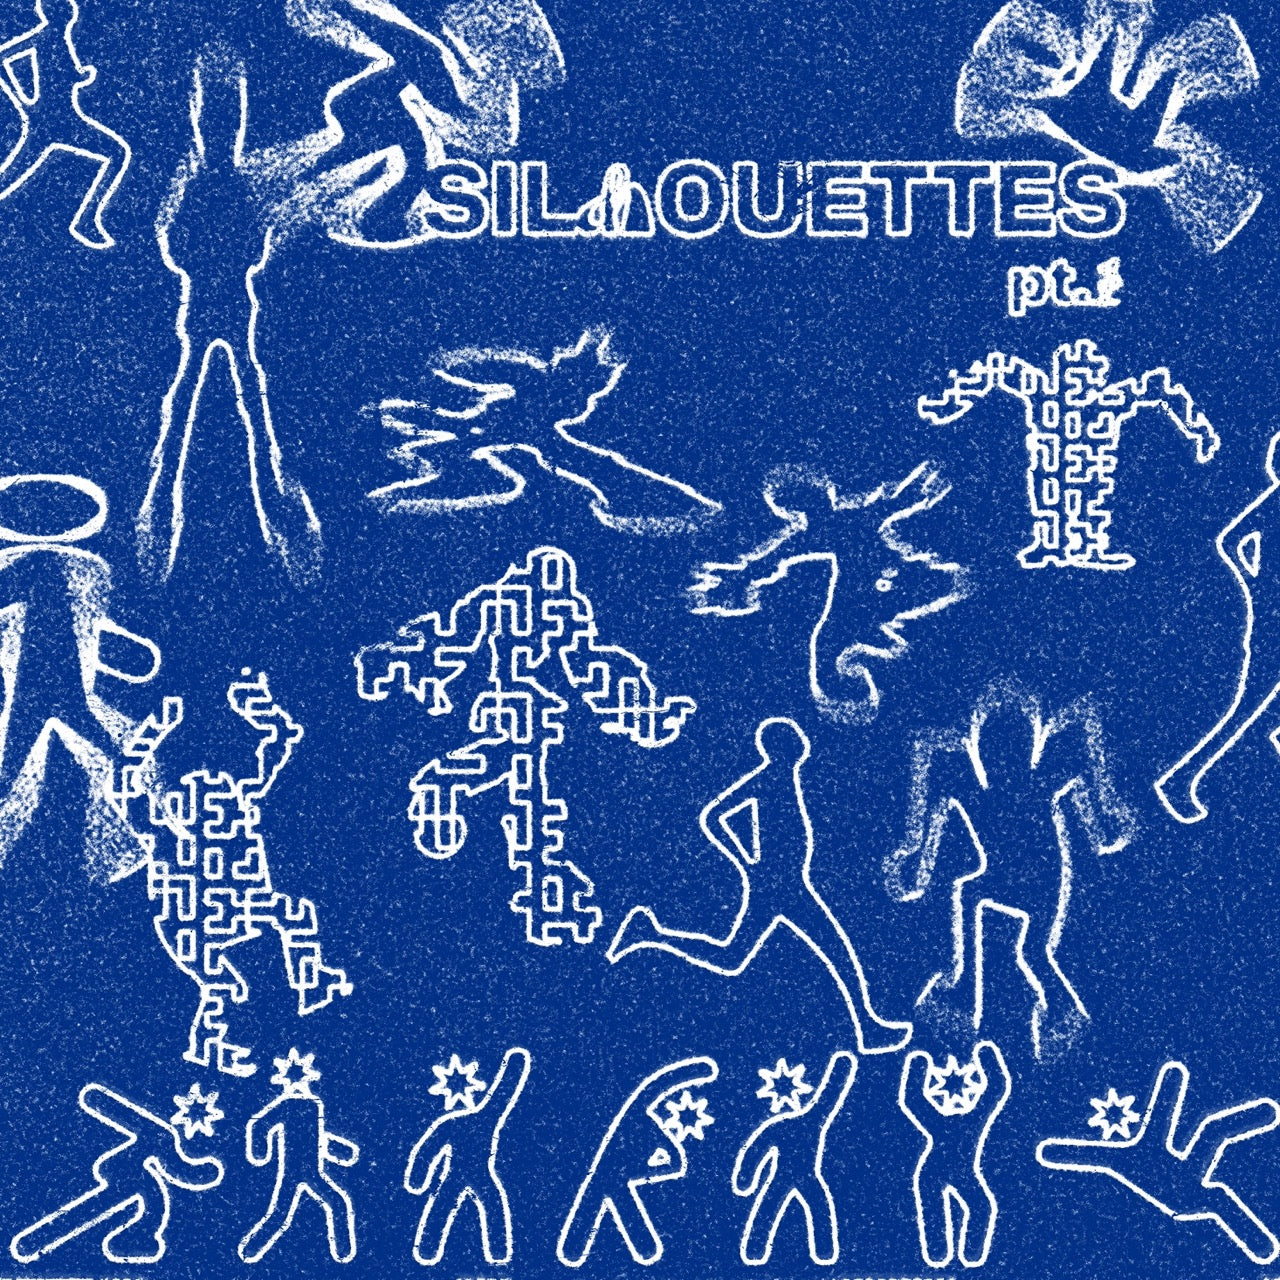 +70 ABSTRACT SILHOUETTES PART.1